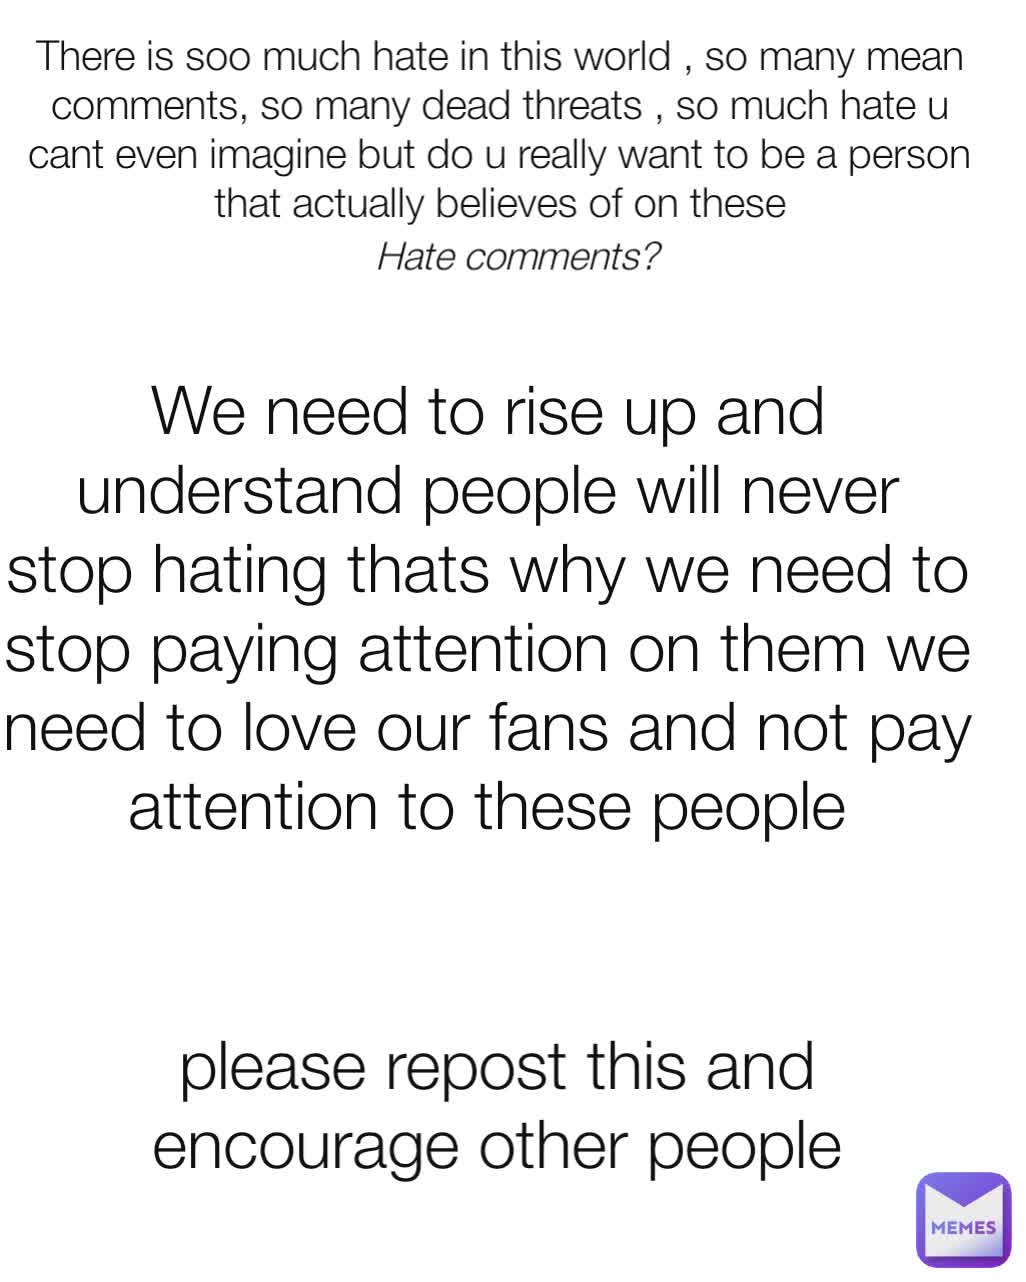 There is soo much hate in this world , so many mean comments, so many dead threats , so much hate u cant even imagine but do u really want to be a person that actually believes of on these Hate comments? please repost this and encourage other people We need to rise up and understand people will never stop hating thats why we need to stop paying attention on them we need to love our fans and not pay attention to these people